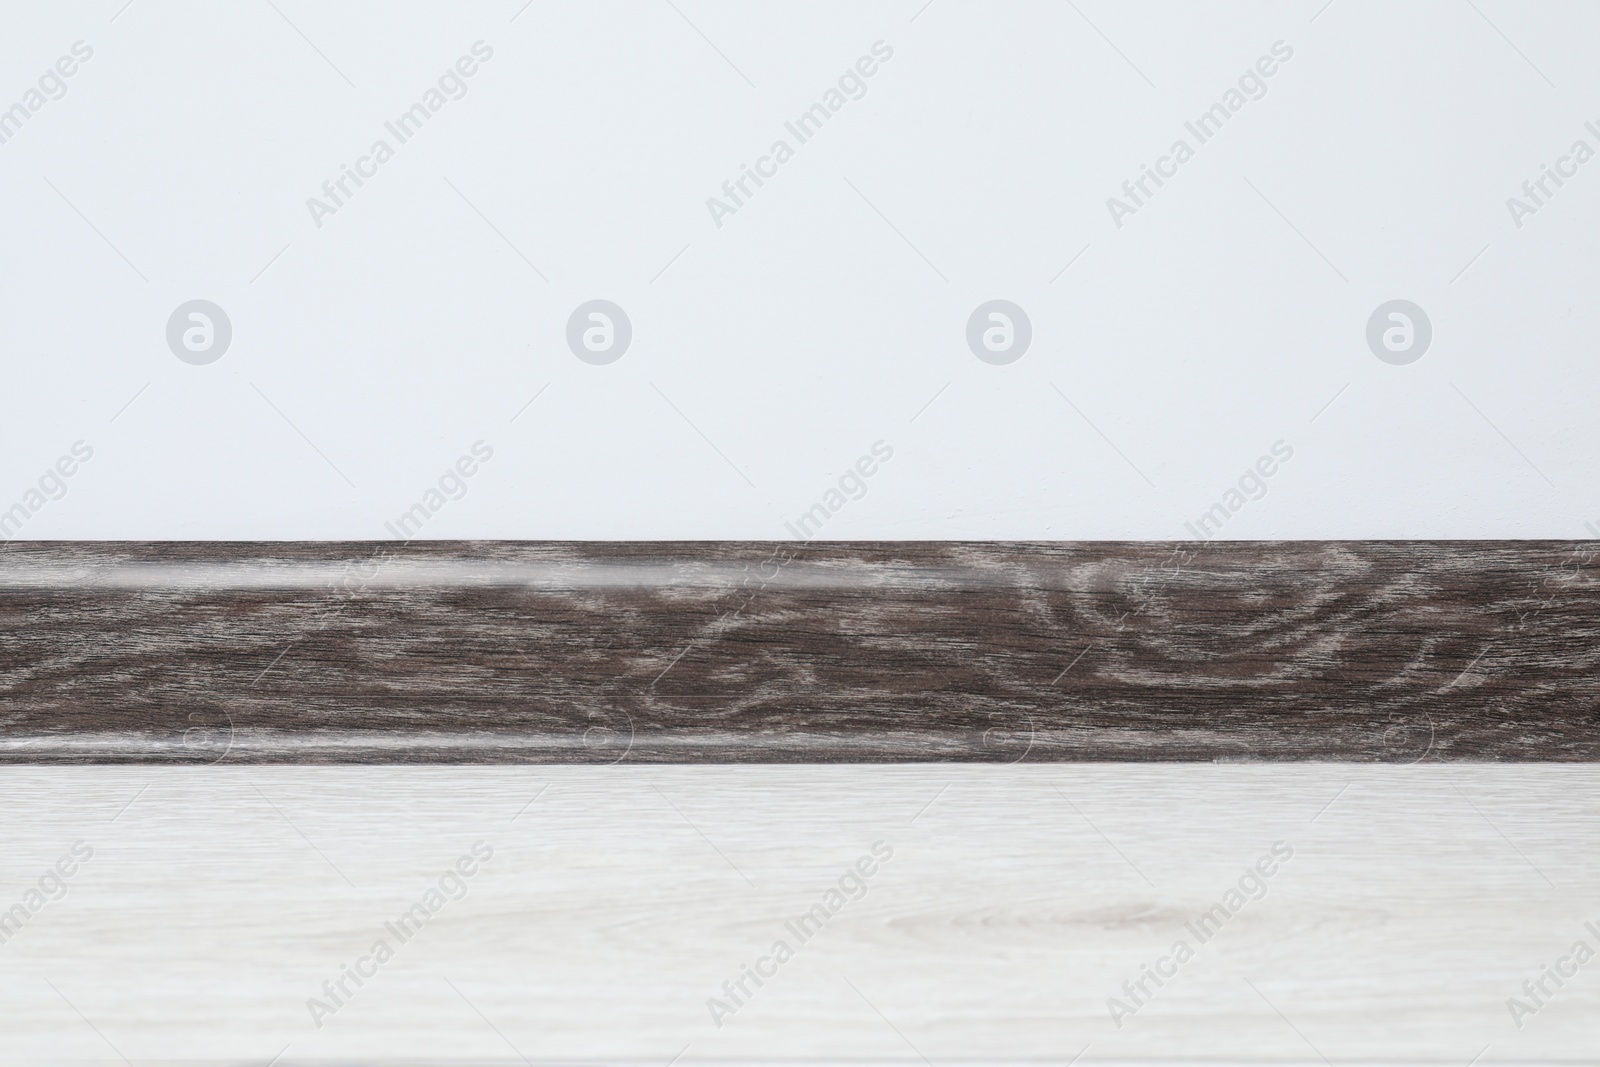 Photo of Black wooden plinth on laminated floor near white wall indoors